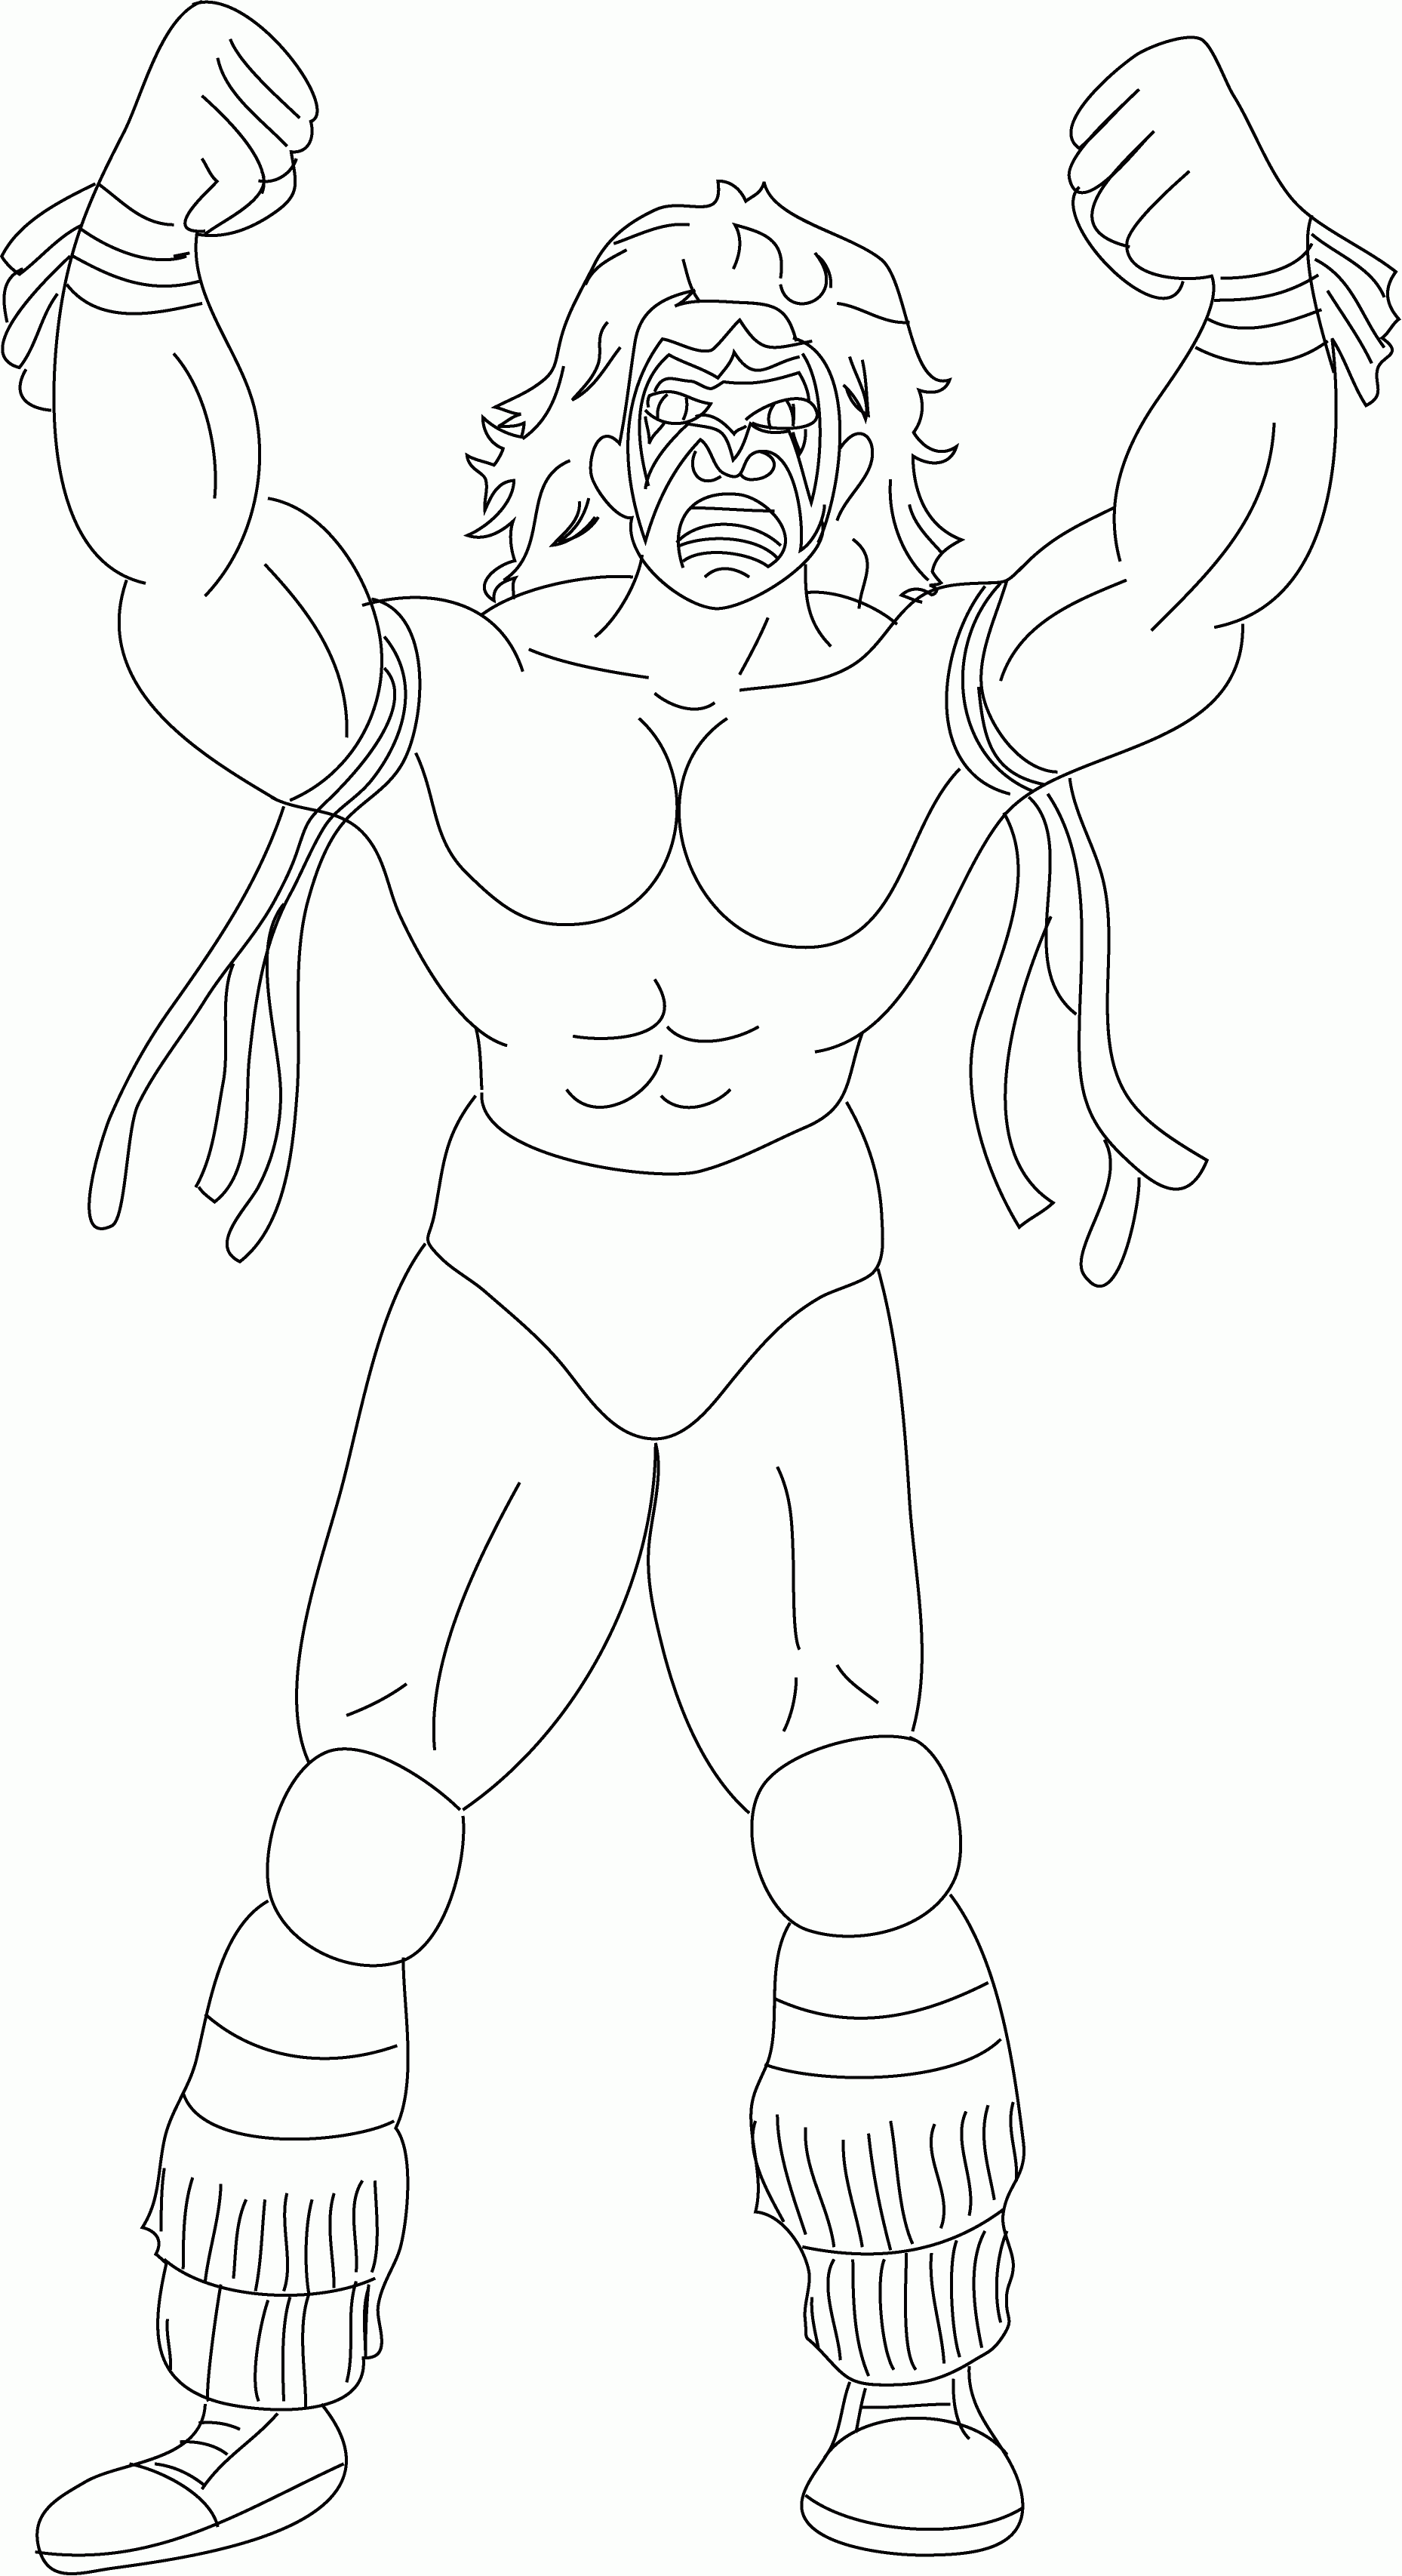 Ultimate Warrior - Coloring Pages for Kids and for Adults